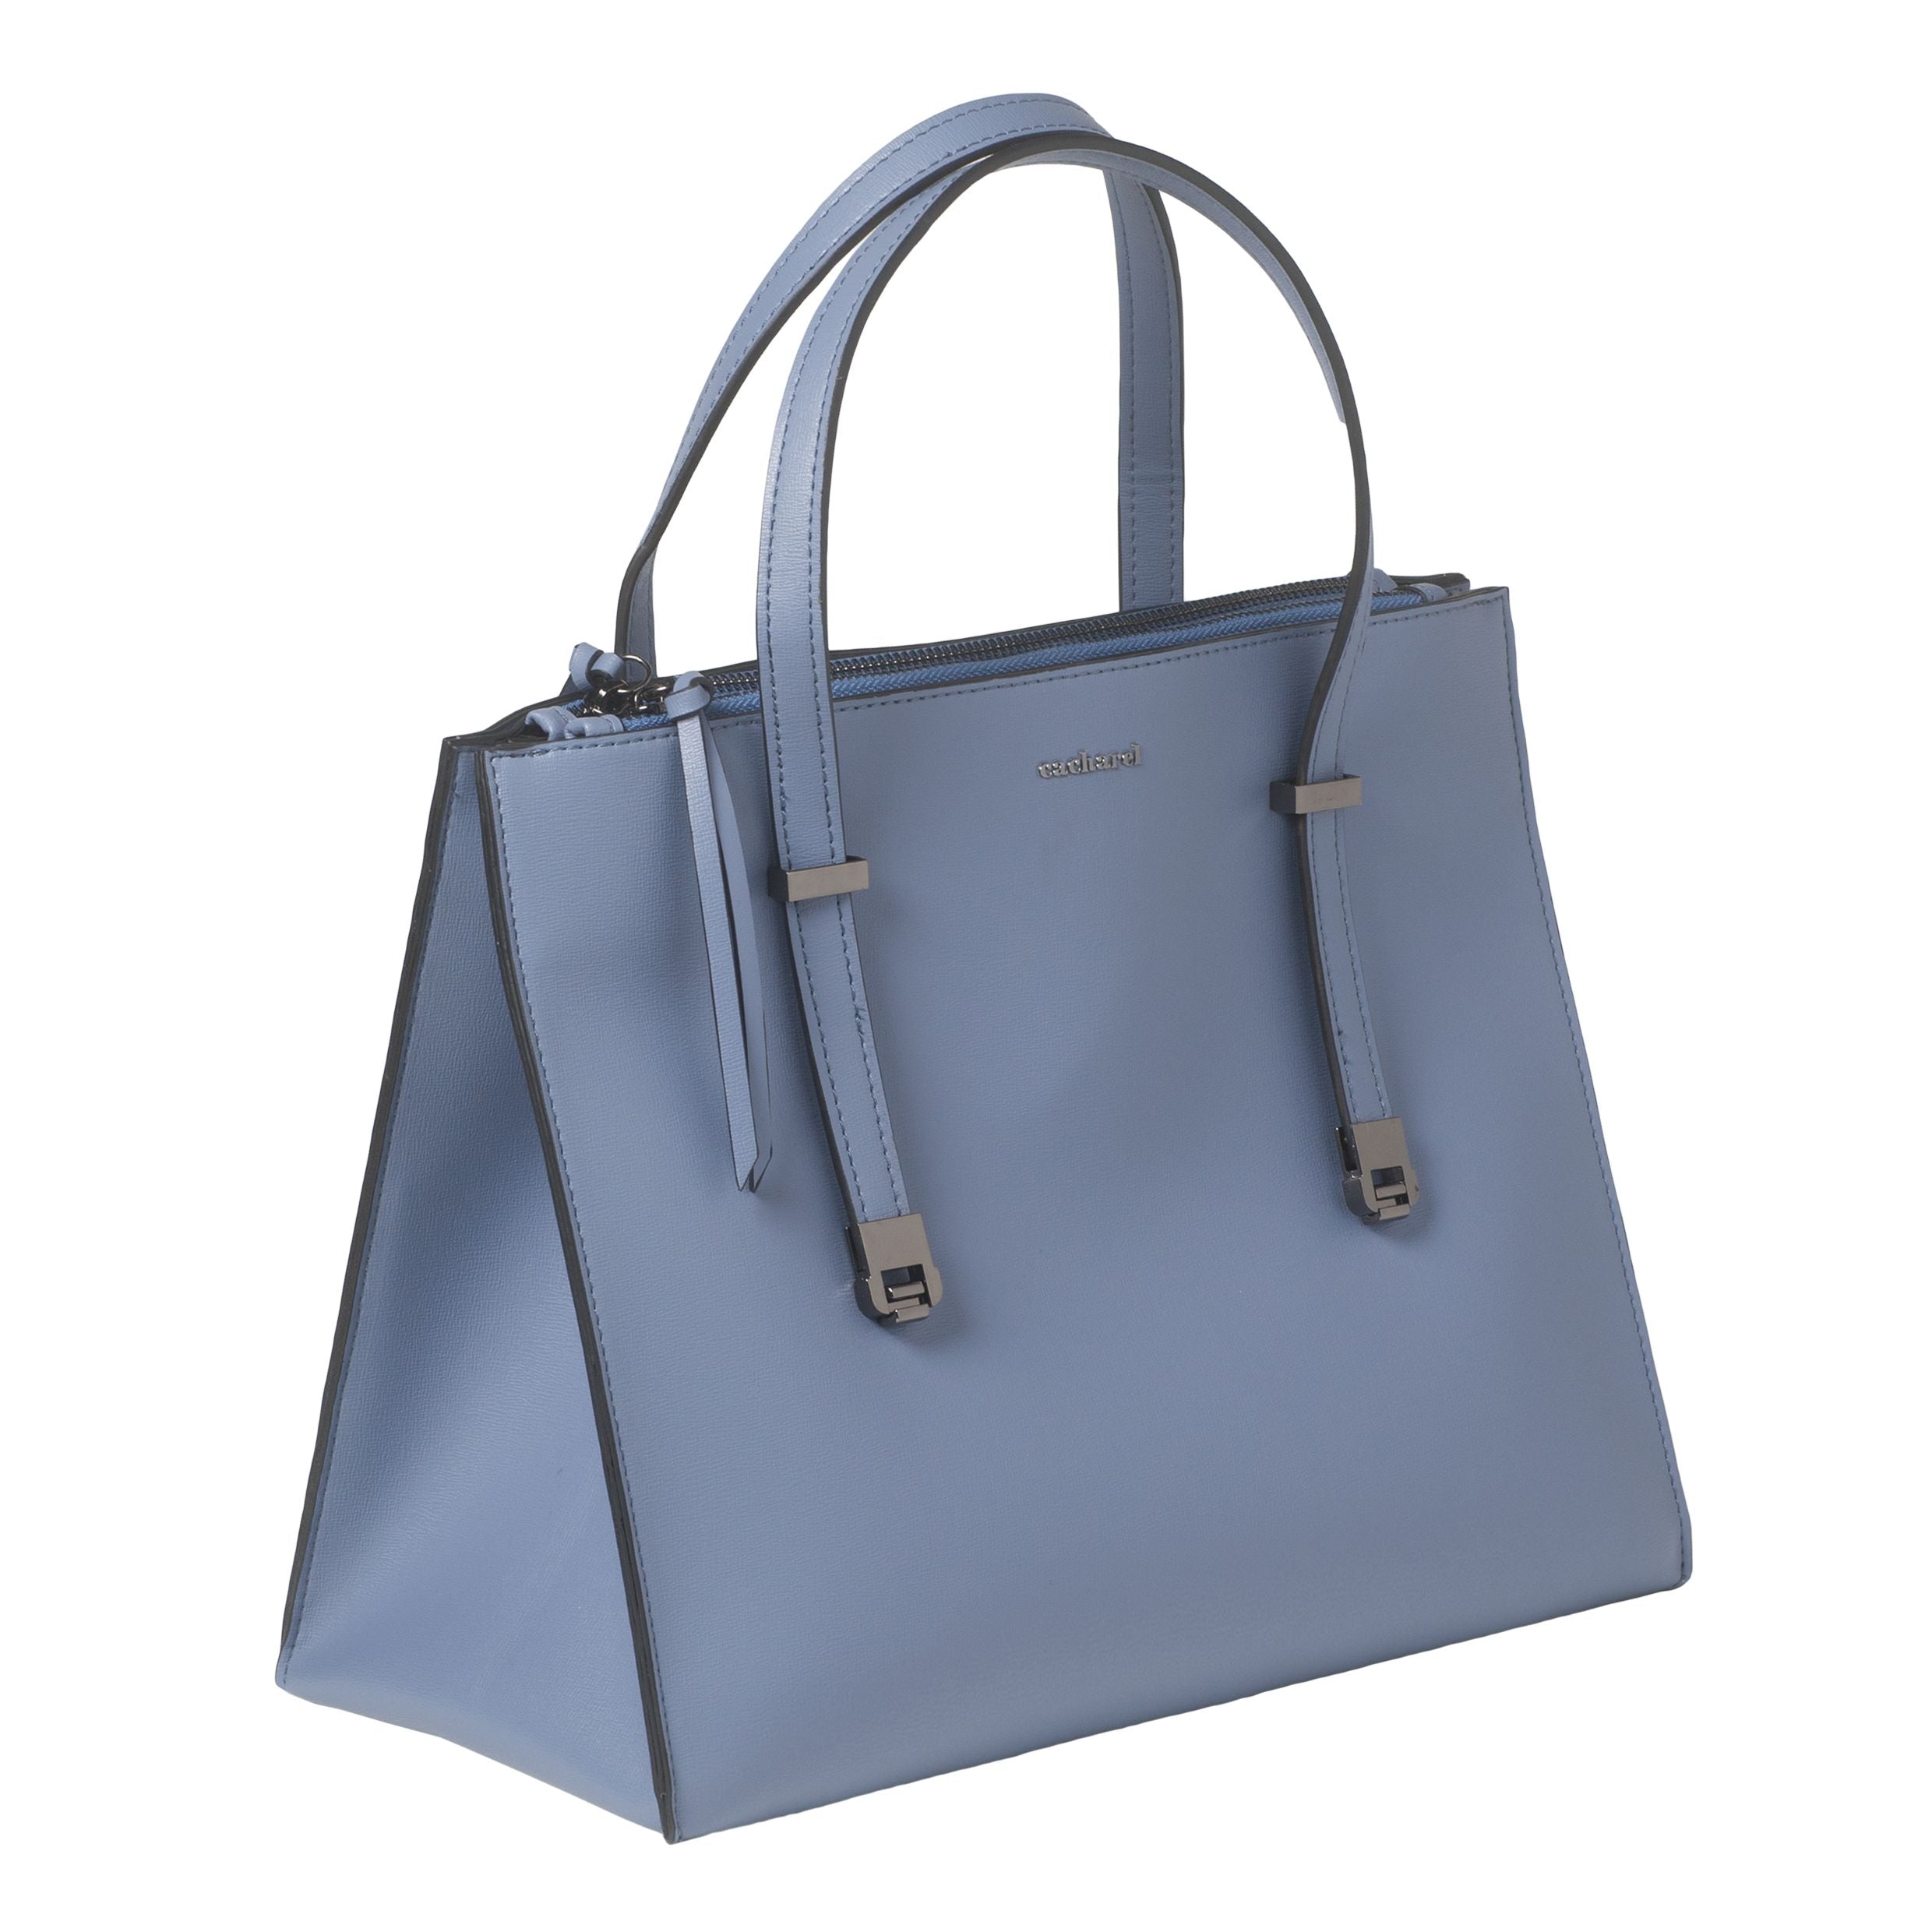 Luxury corporate gifts for Cacharel lady bag Alma in Indigo color